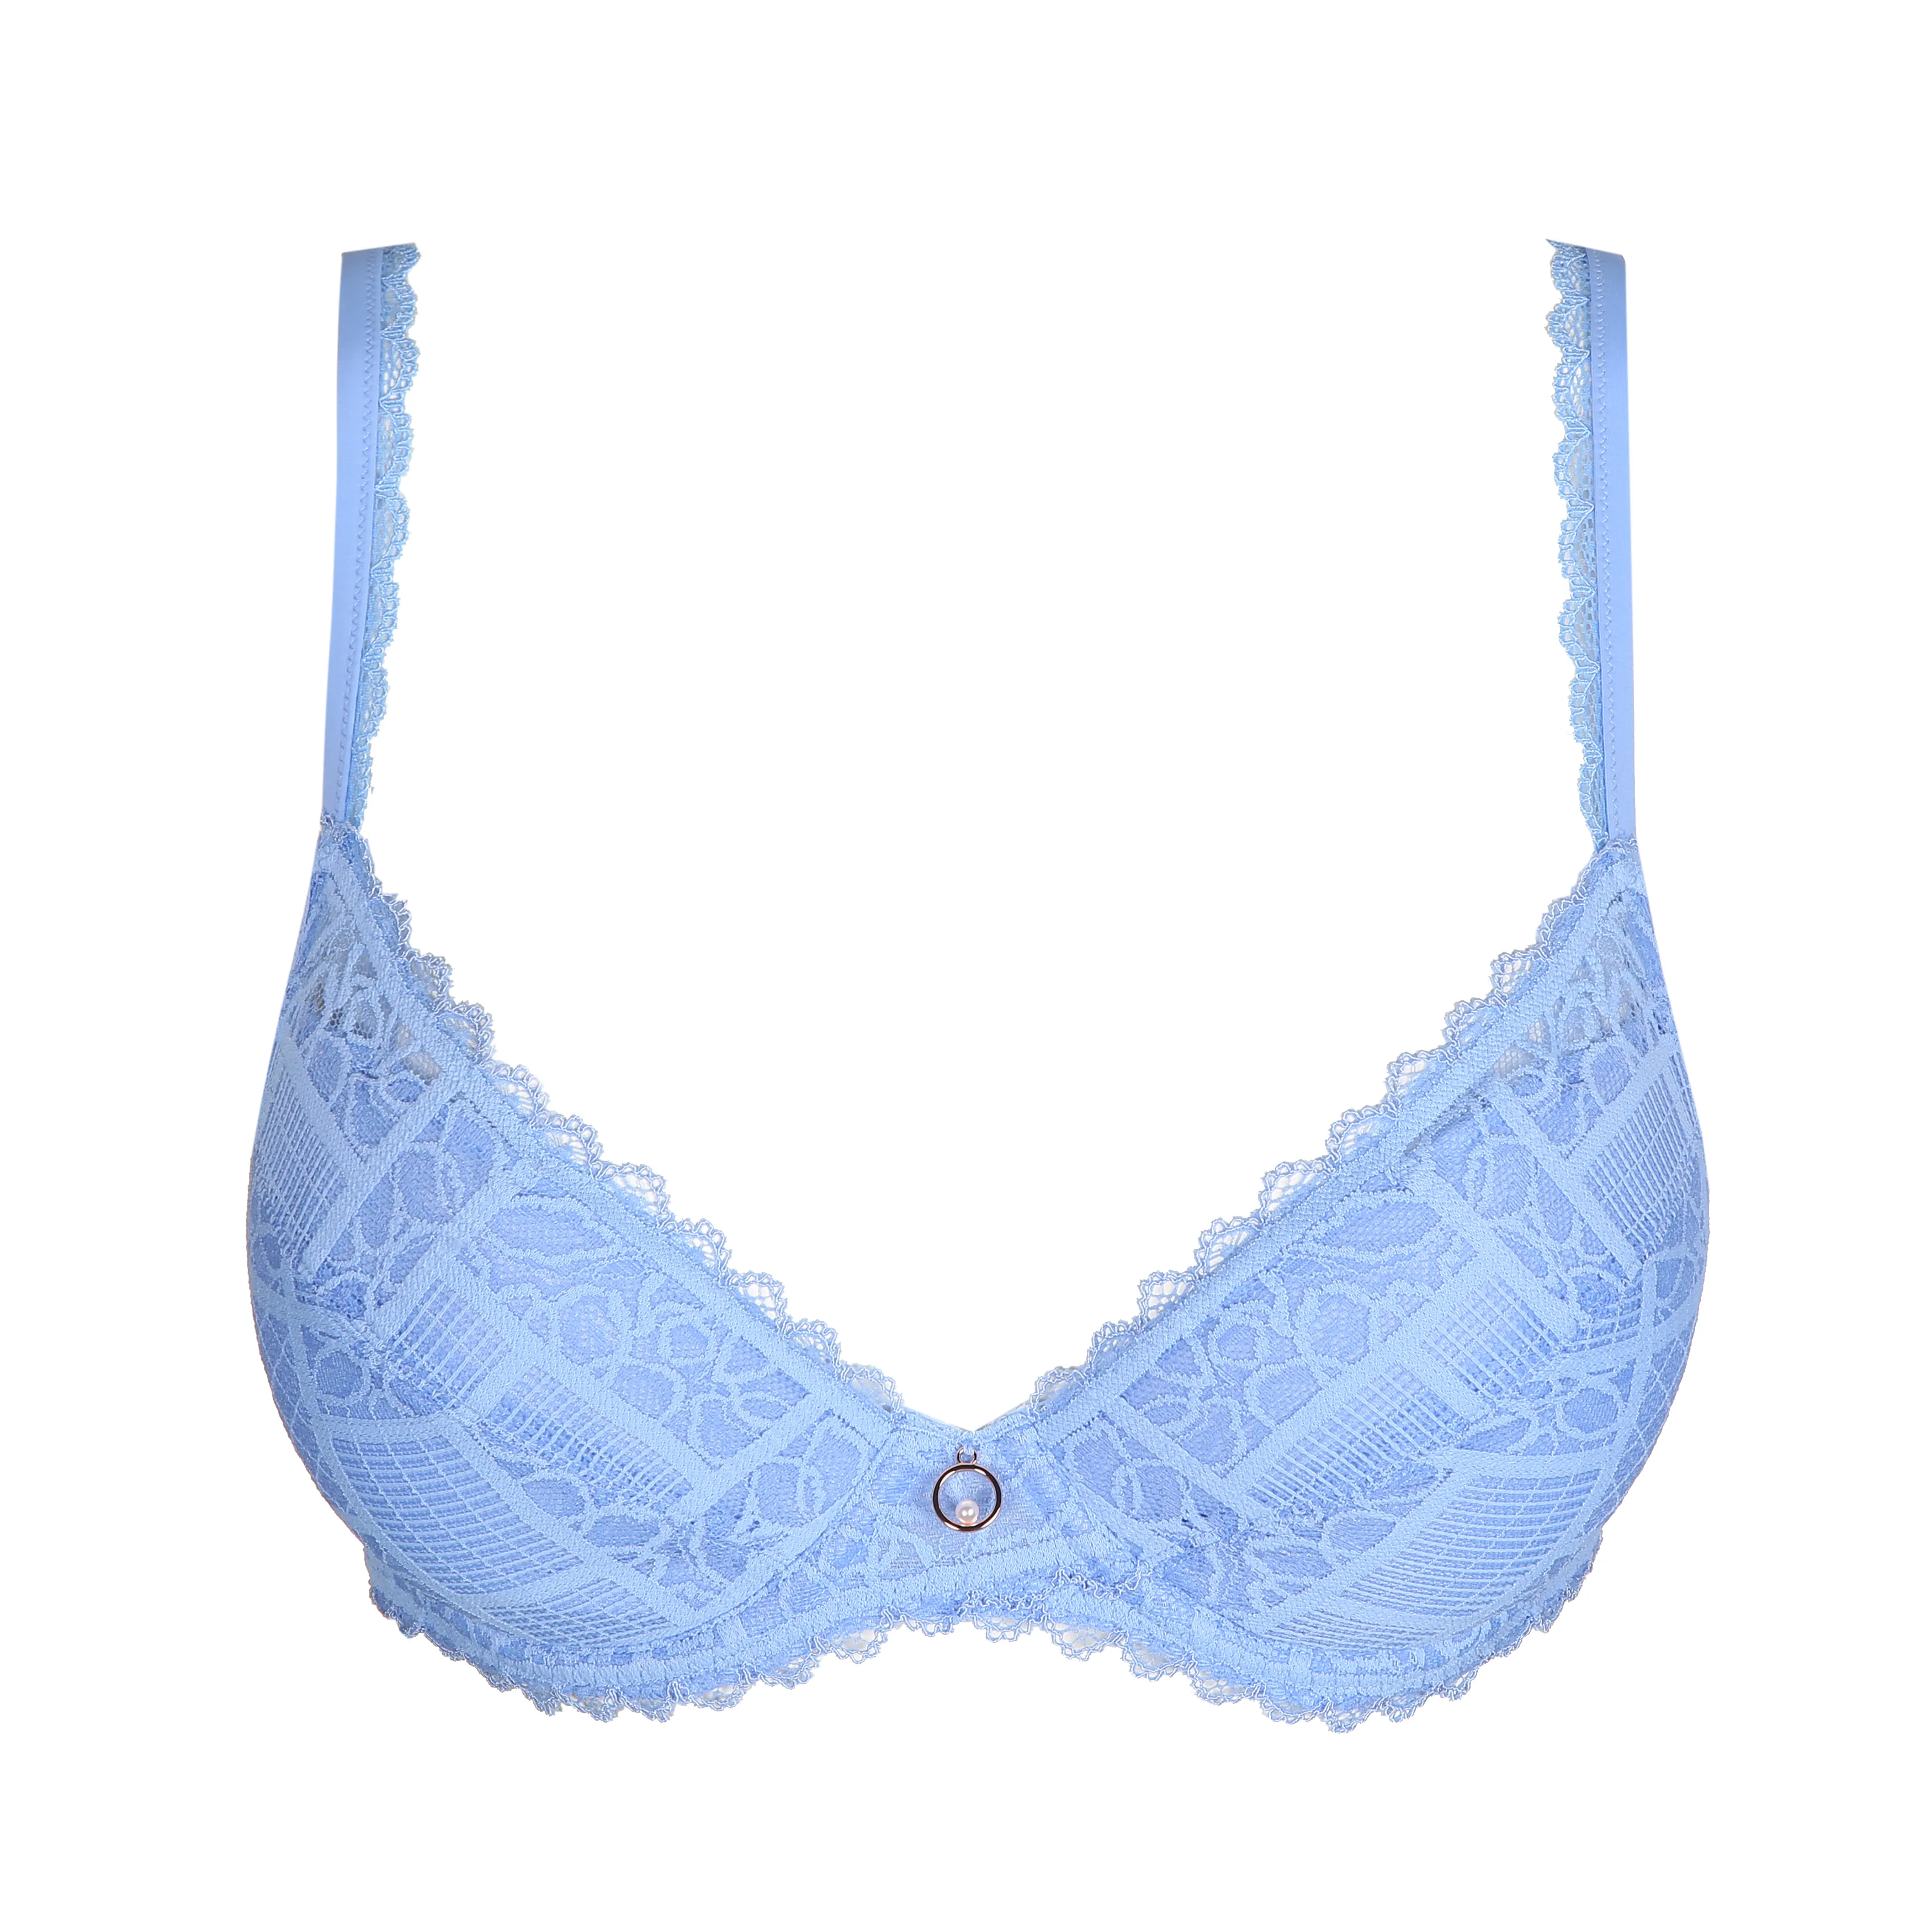 Push-up bra with lace Woman, Light blue